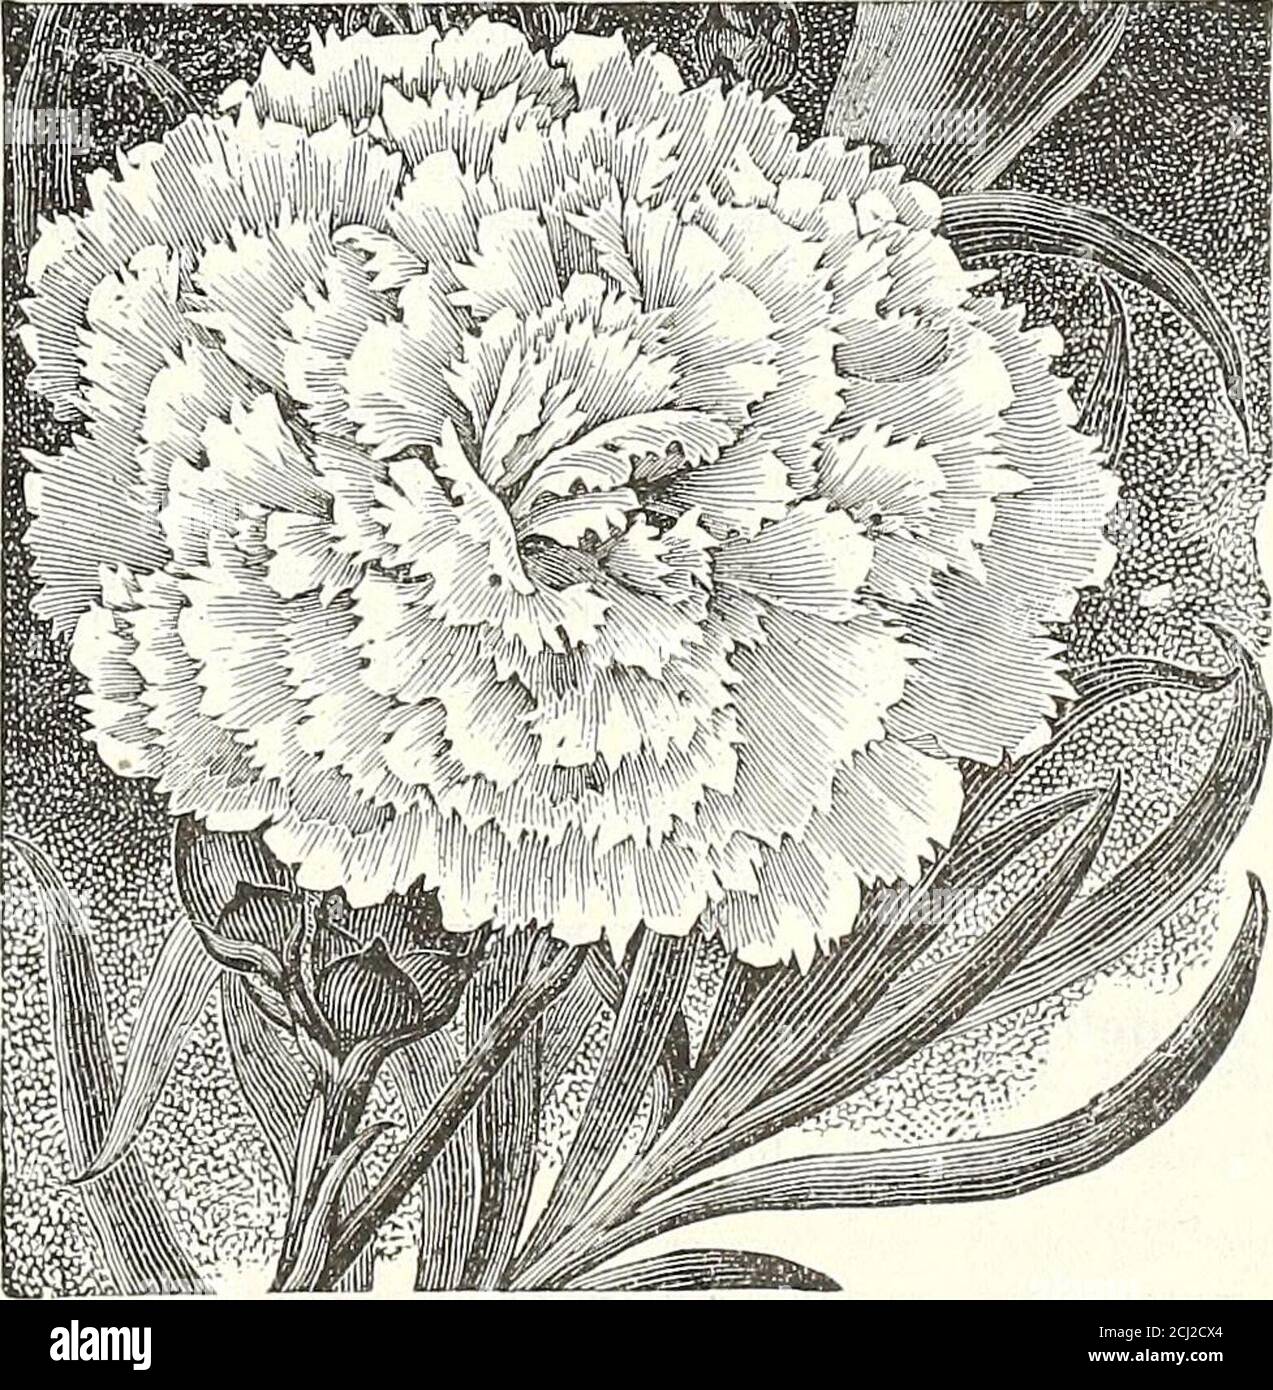 . Dreer's autumn 1904 catalogue . Standai; Ray.. Carnation. The beautiful Xarcissus shown in colors on the cover .of this catalogue are offered on page 11. 30 Henry A, Dreer, Philadelptiia^ Pa* ^S ^A j 1 ^-^Ugl^ fy .^■!- CYCAS REVOLUTA (SagoPalm). Valuable drcoraiive plants bulh loi lawn and house decora-tion ; iheir heavy, glossy, deep green trends resist alike thegas, dust and cold to which decorative plants are frequentlyexposed. We grow an immense stock of them, and have anexceptionally fine lot in popular sizes for house decoration. Height Number Length of Stem. of Leaves. of Leaves. 4 10 Stock Photo